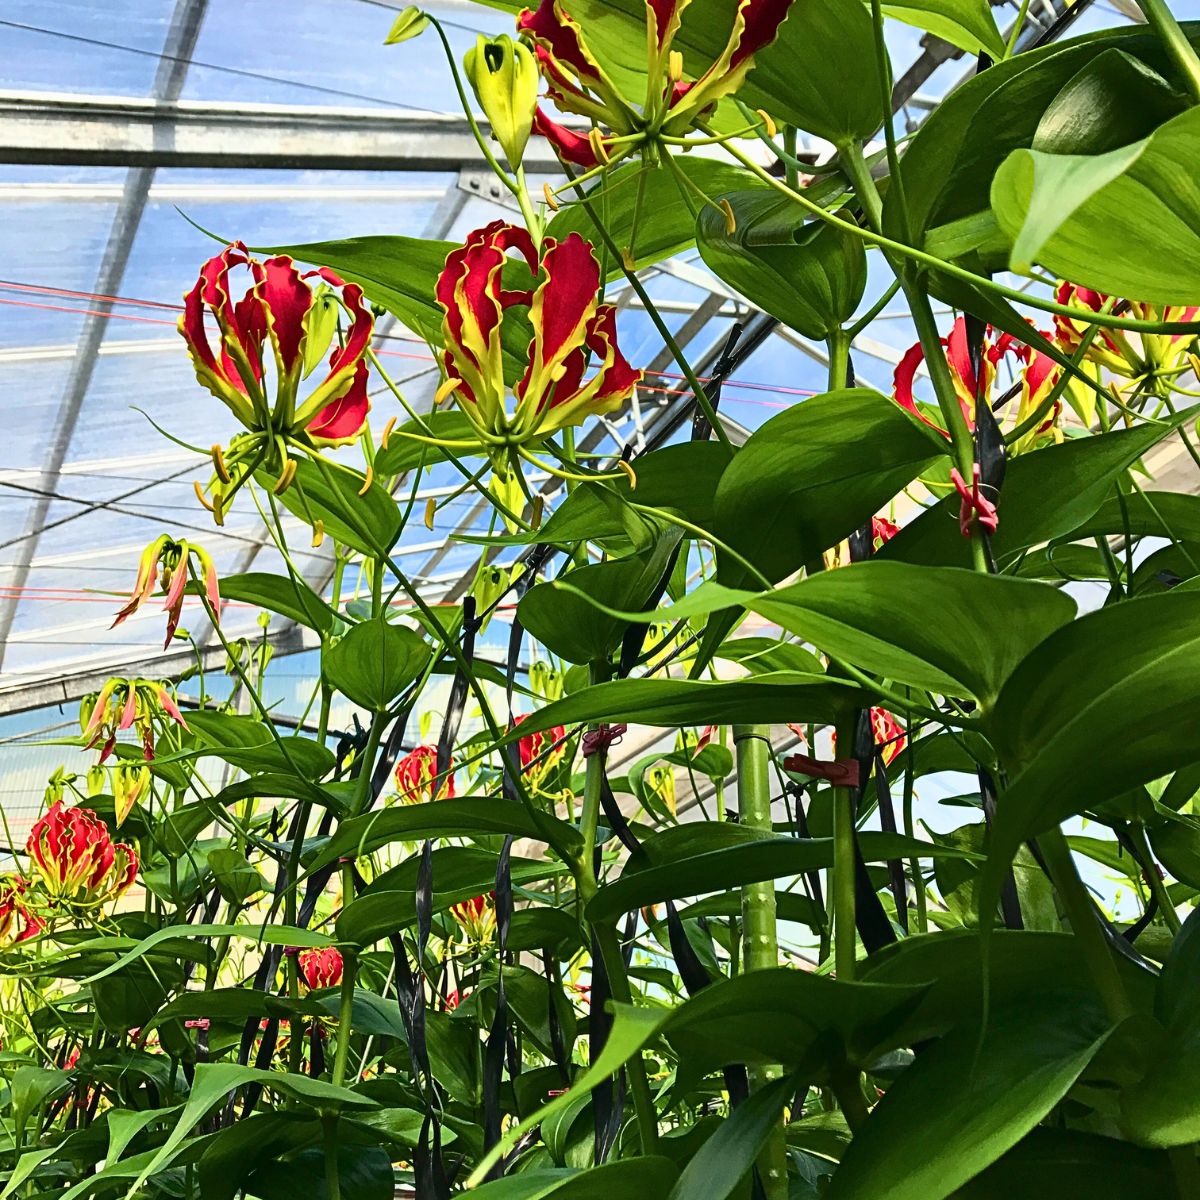 Aucnet Brings the Unique Beauty of Japan’s Gloriosa to the World